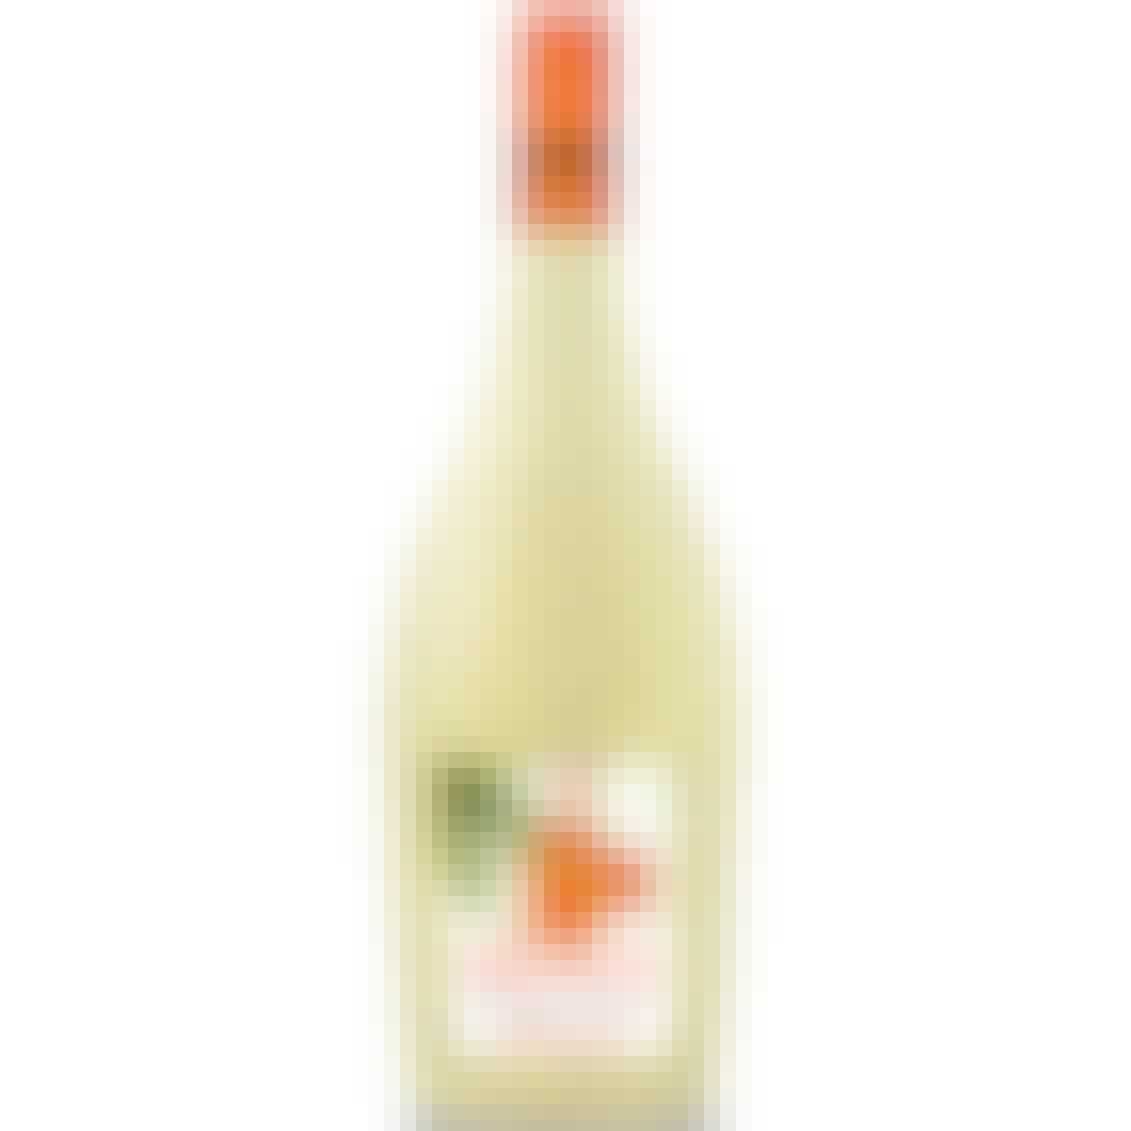 Tropical Moscato Passion Fruit Moscato 750ml